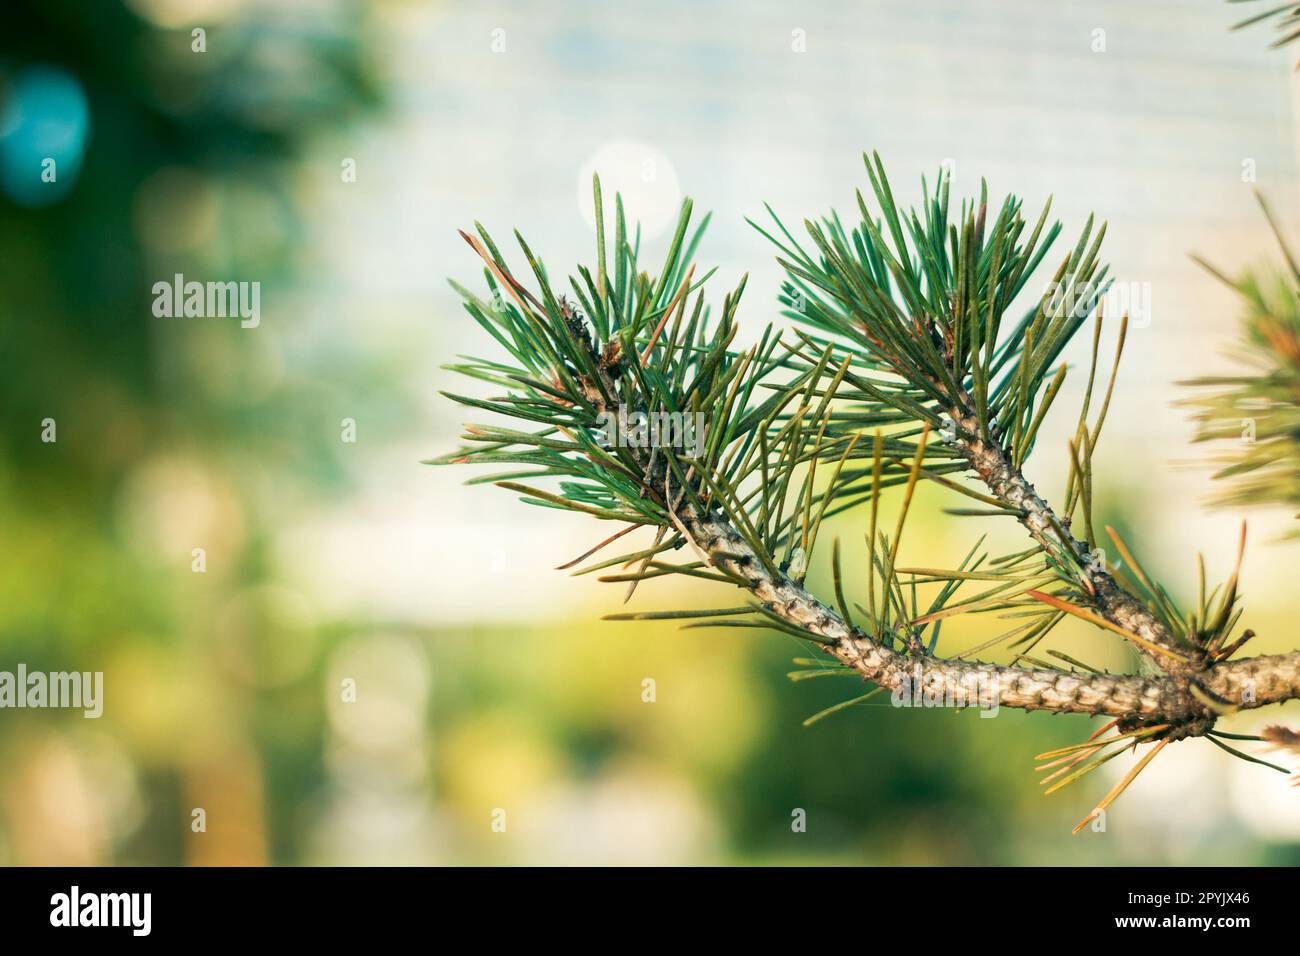 Details of the pine tree outdoors Stock Photo